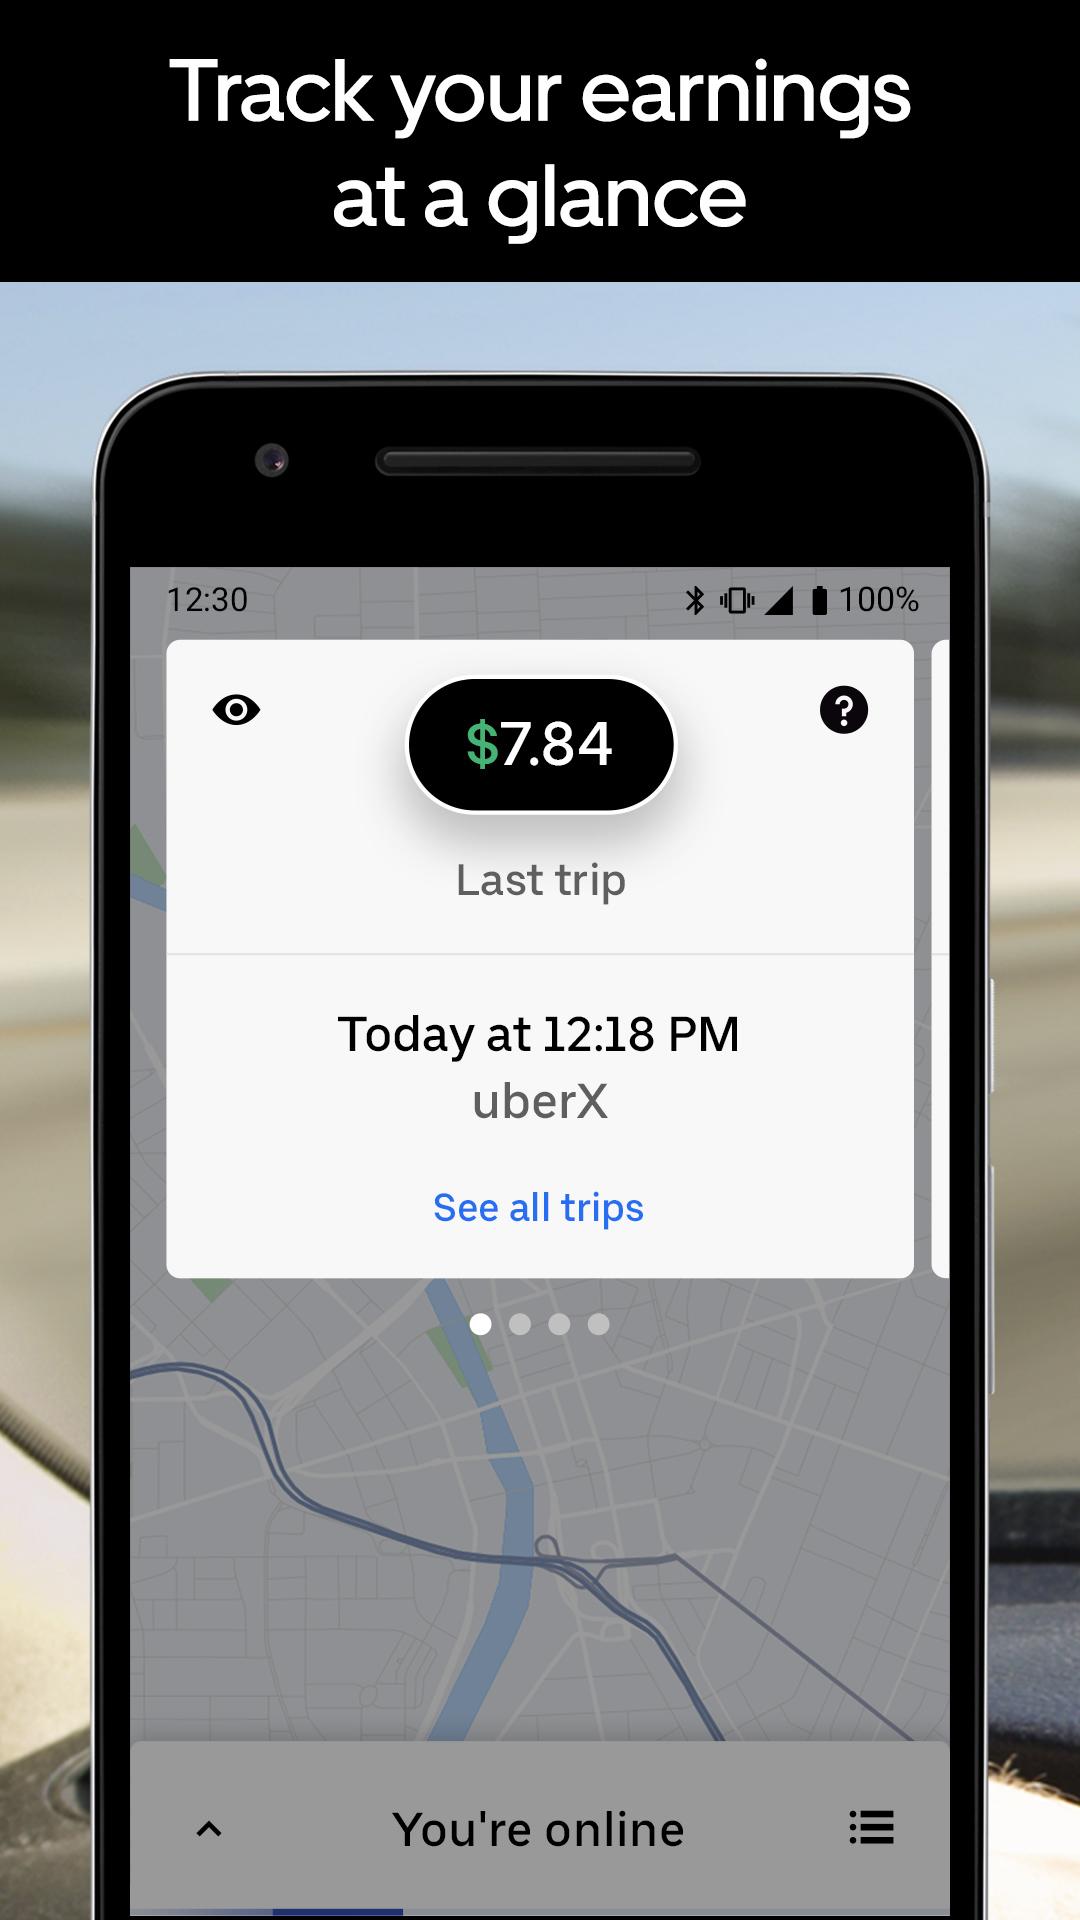 Android application Uber - Driver: Drive & Deliver screenshort